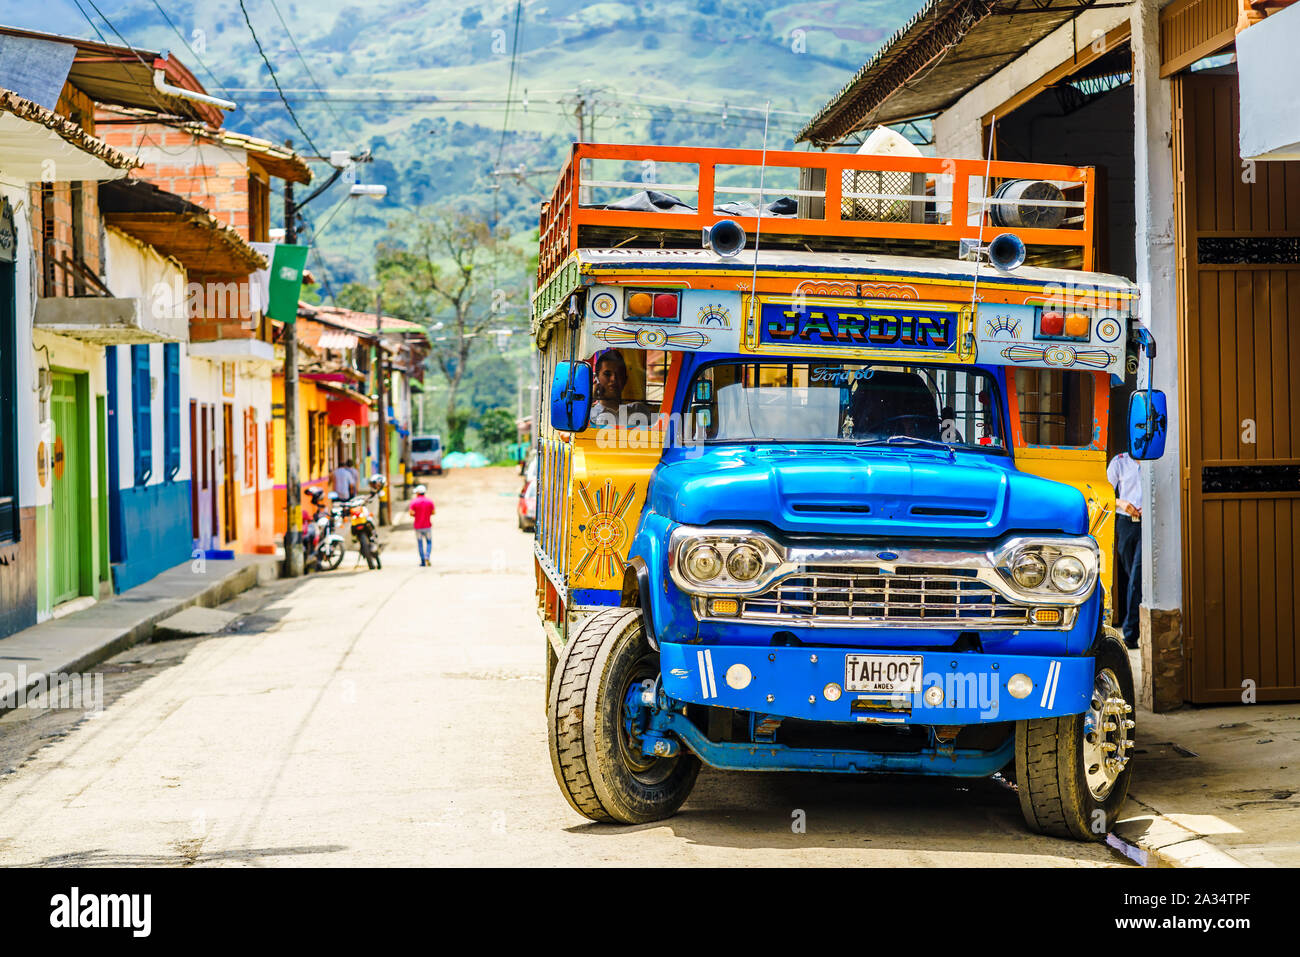 View on typical colorful chicken bus in Jardin, Antioquia, Colombia, South America on 27th March 2019  Stock Photo